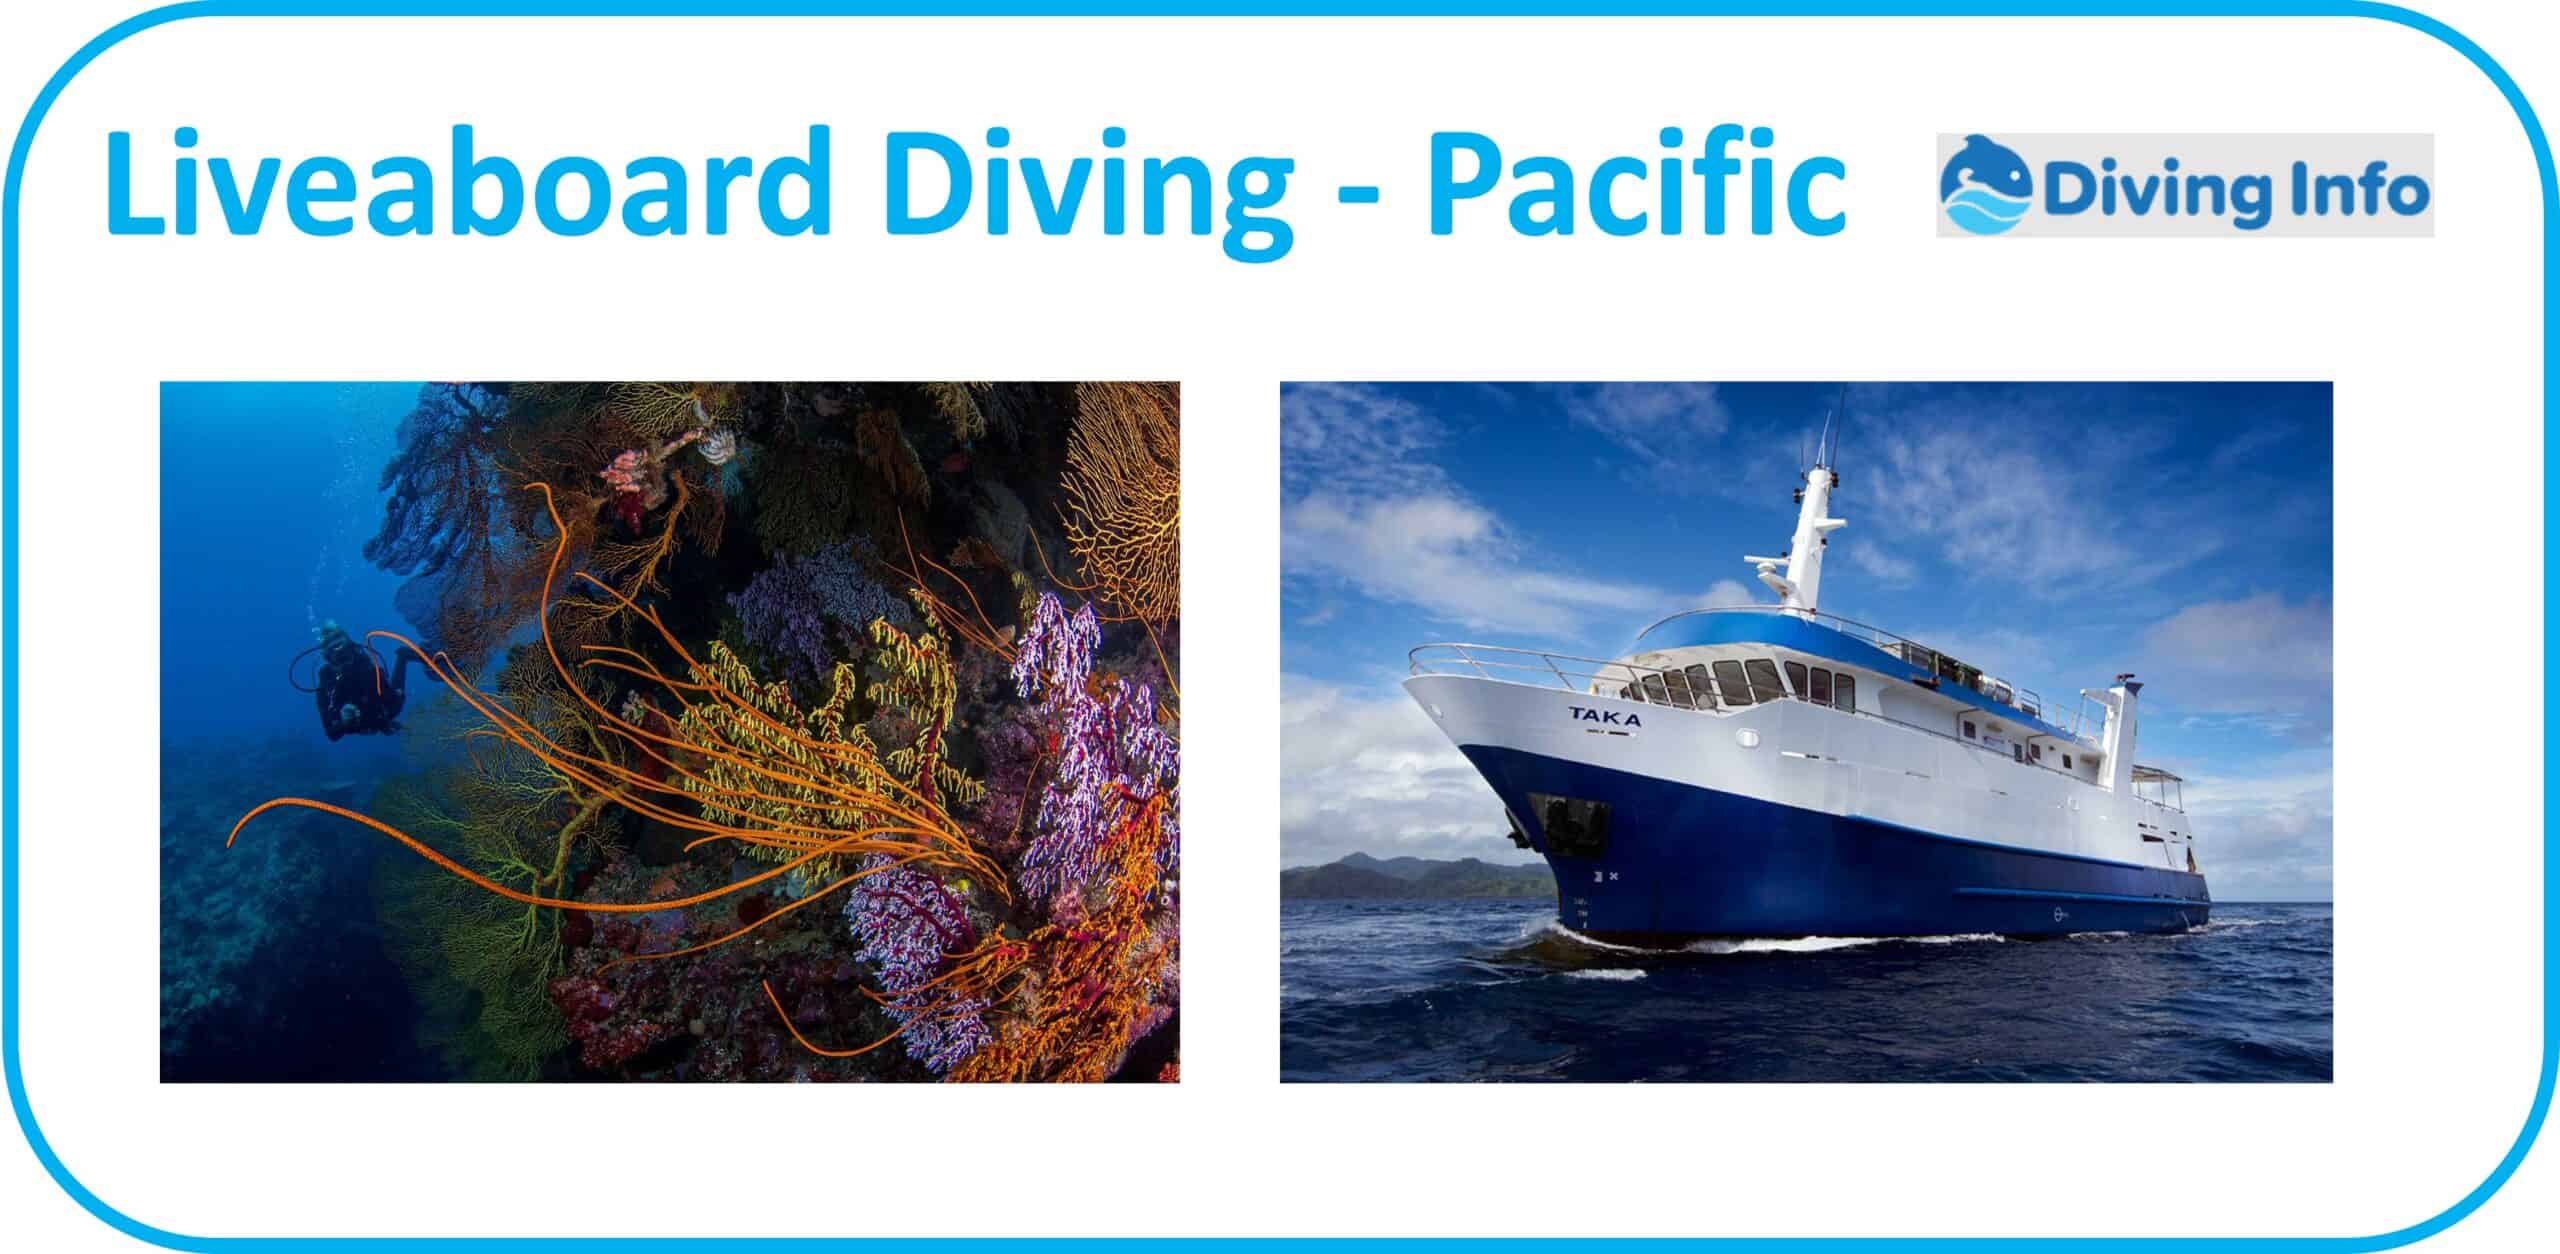 Liveaboard Diving - Pacific